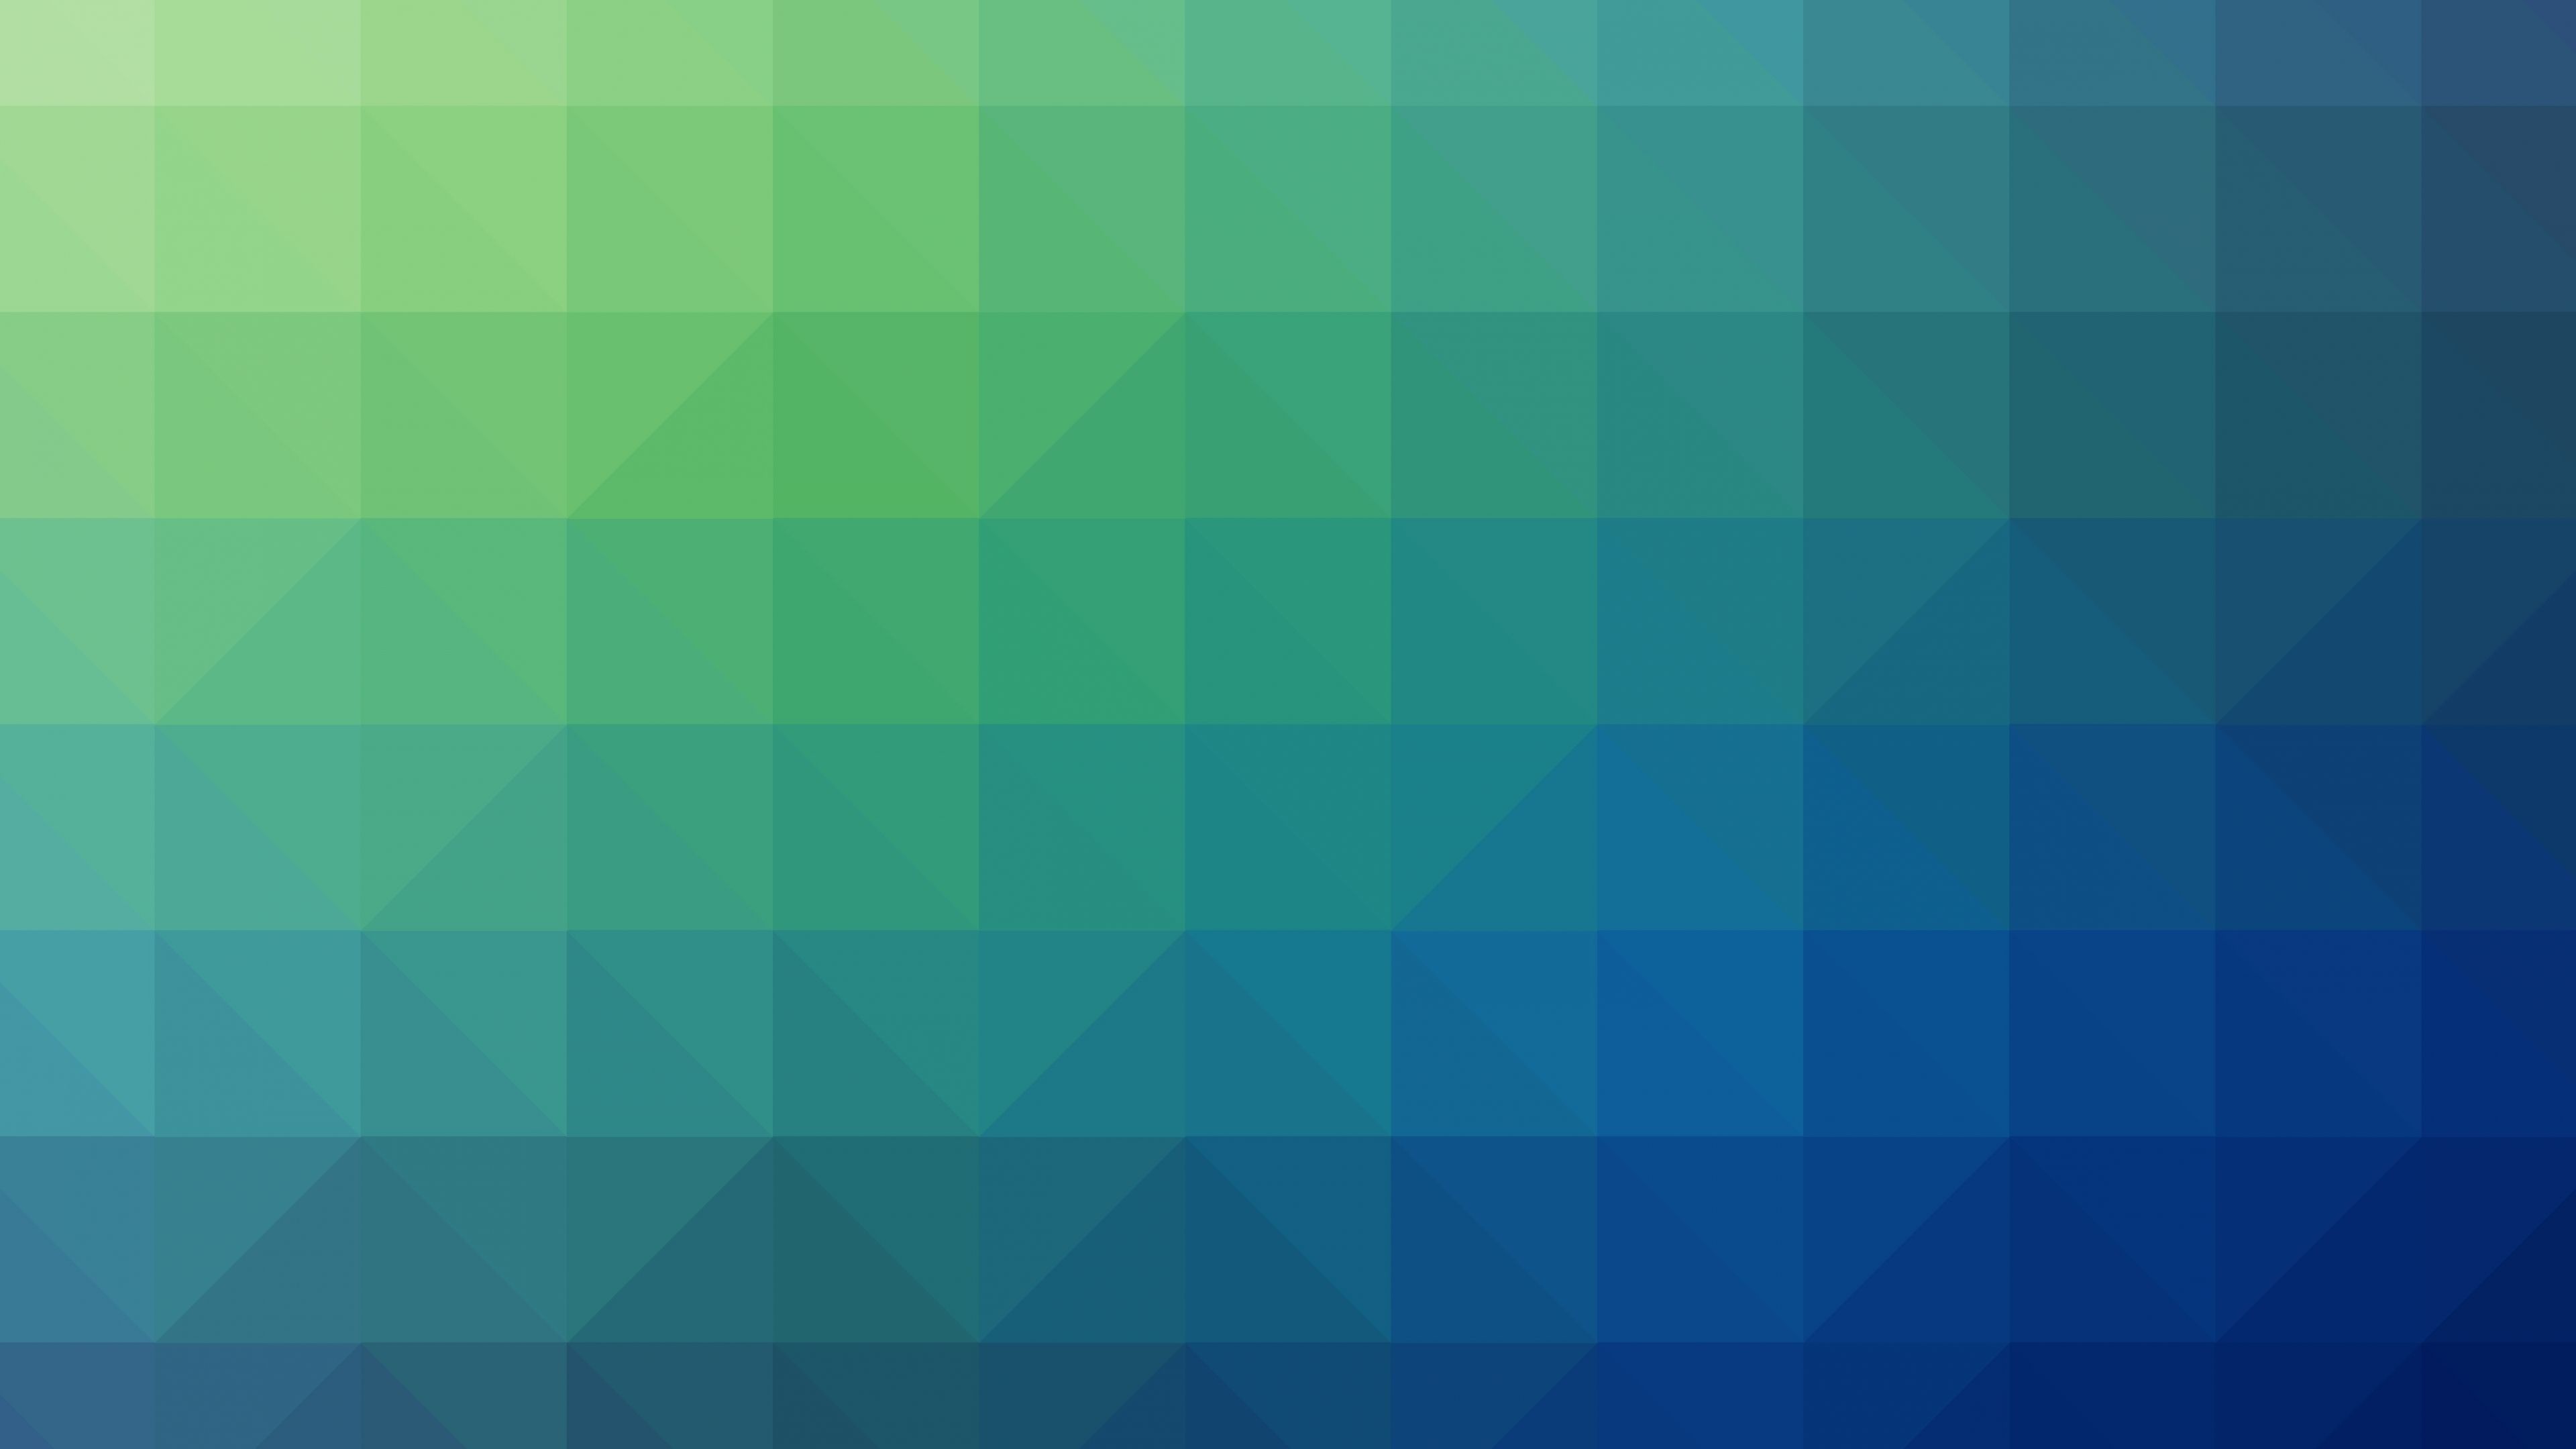 Geometric gradient wallpapers, Top free backgrounds, Abstract shapes, Modern design, 3840x2160 4K Desktop